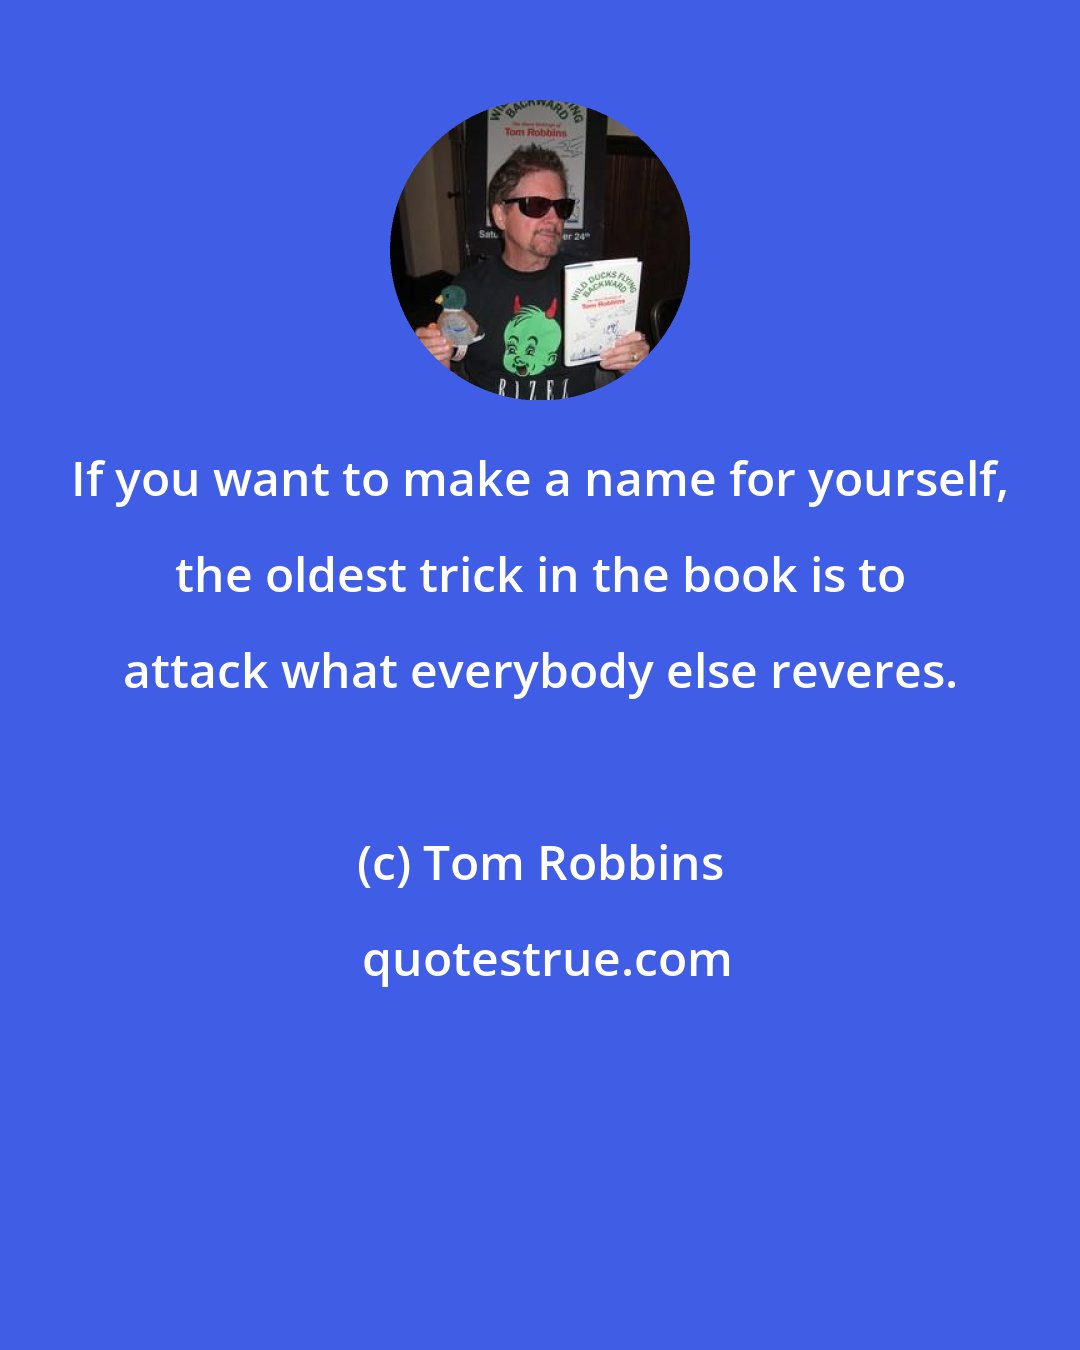 Tom Robbins: If you want to make a name for yourself, the oldest trick in the book is to attack what everybody else reveres.